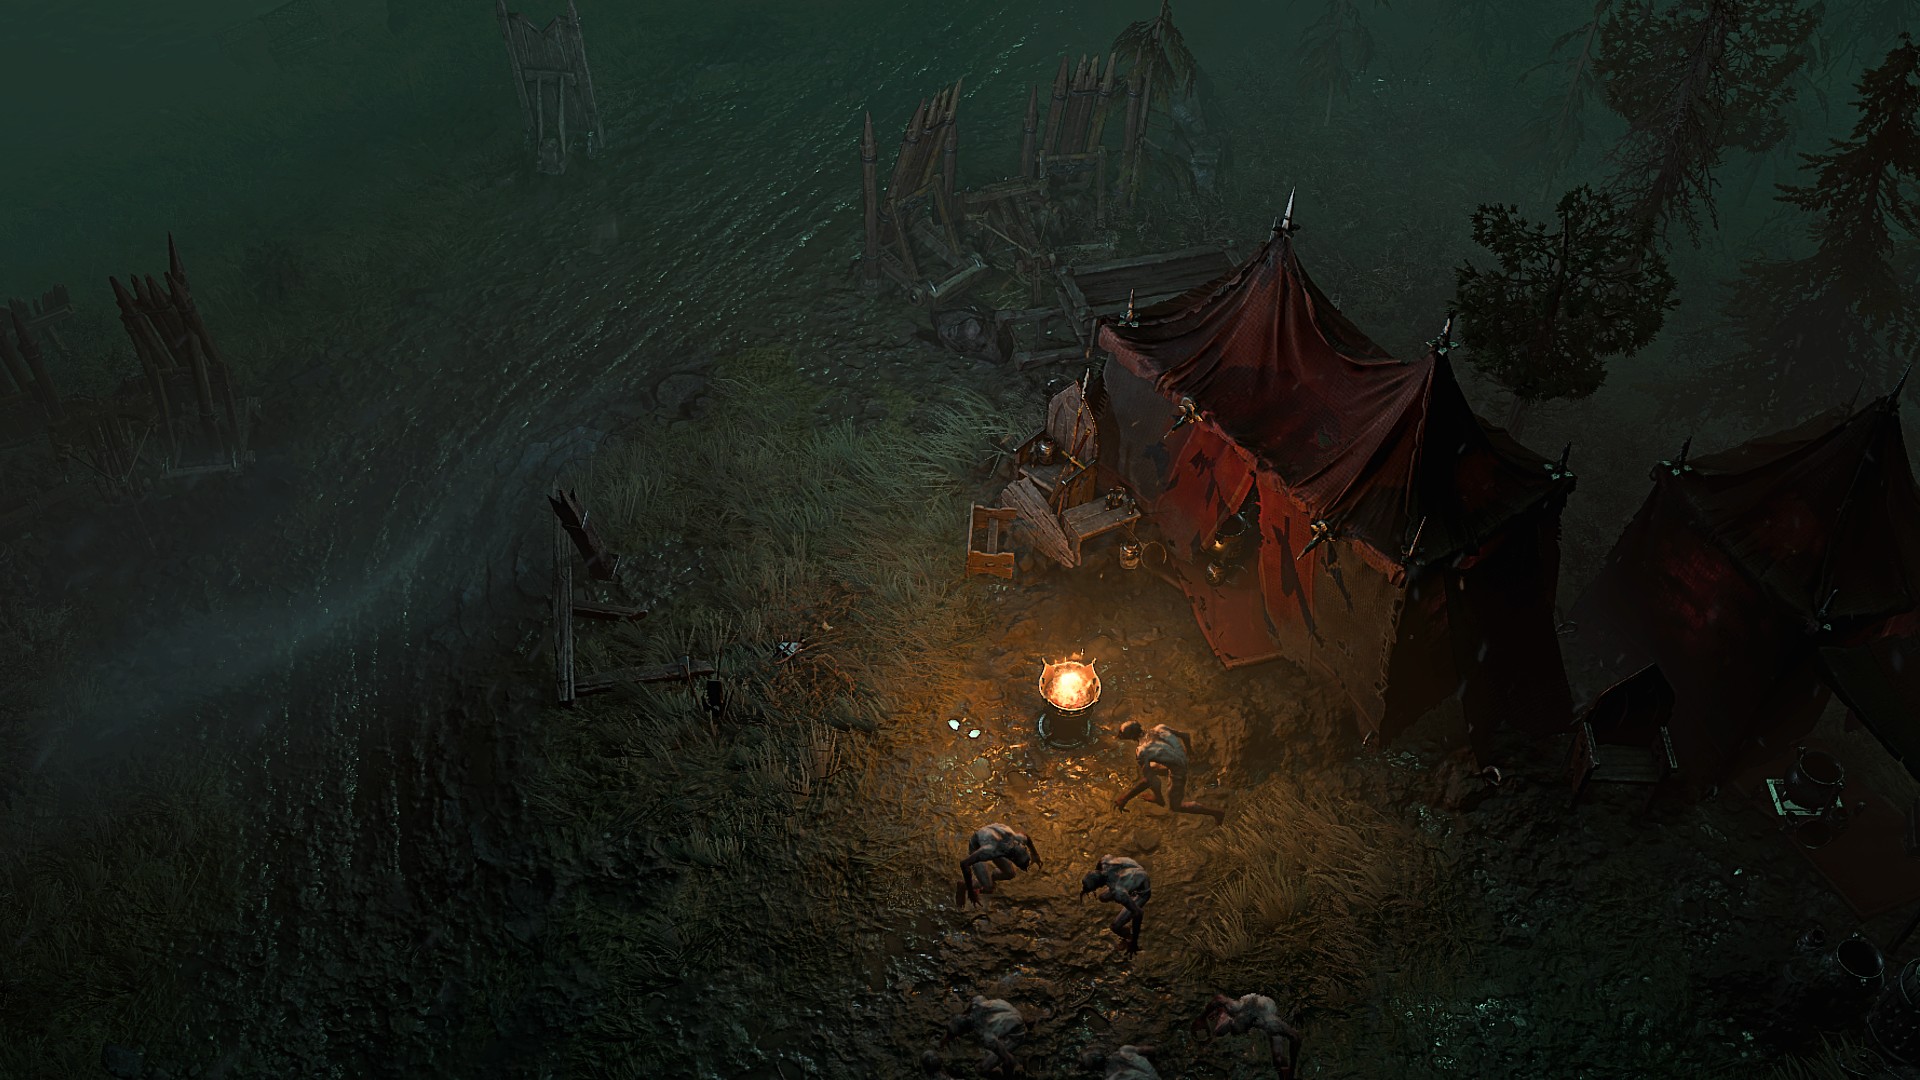 One of Diablo 4's dimly lit campsites attacked in the night by ghouls